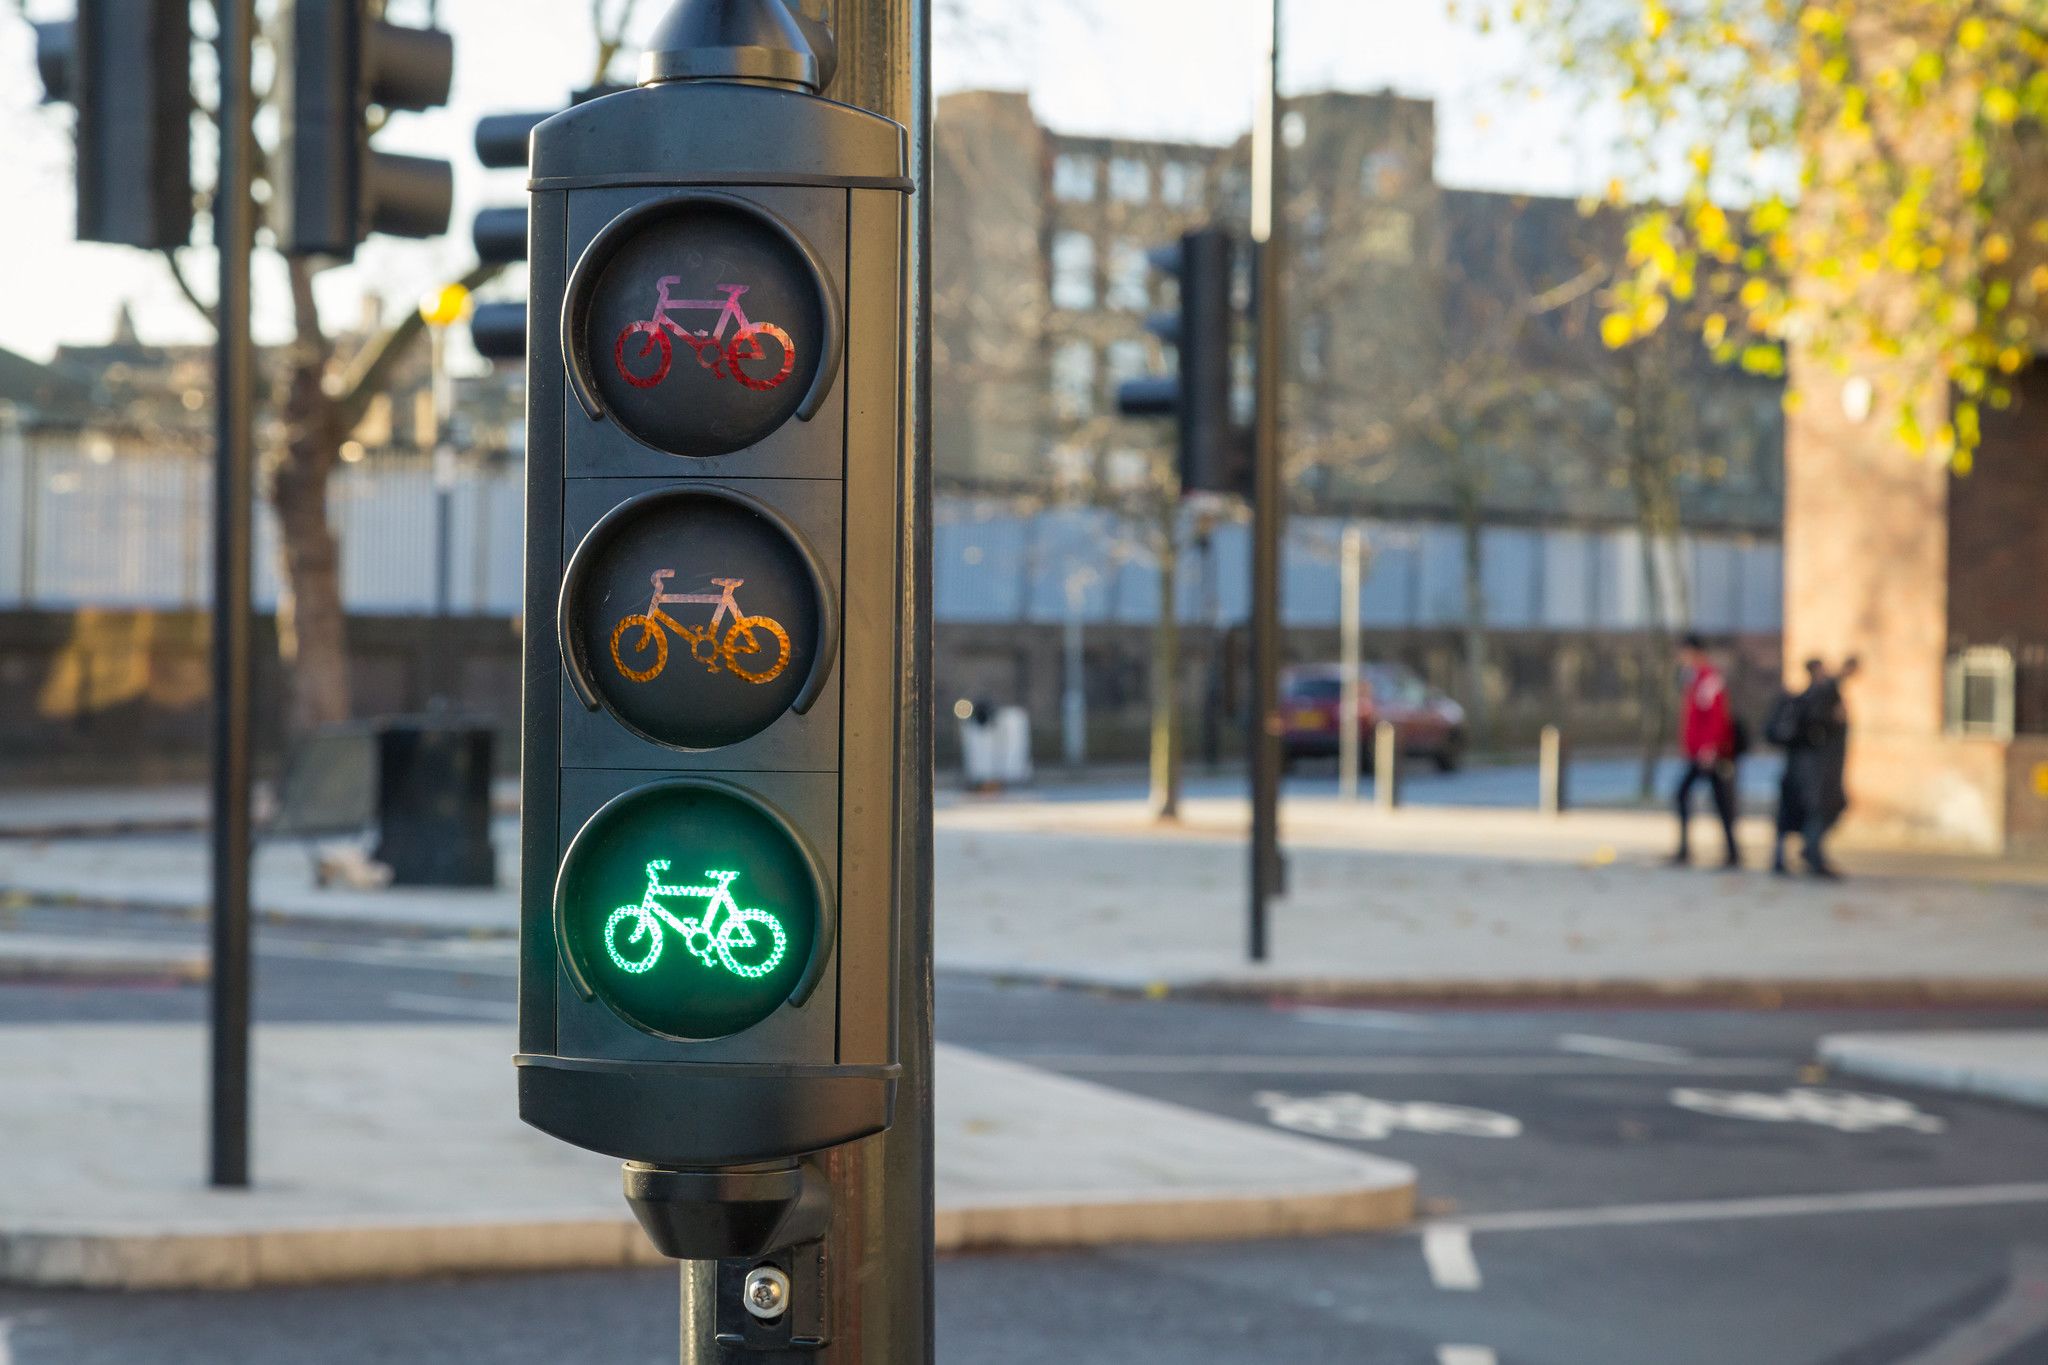 A low level cycle signal showing a green light.